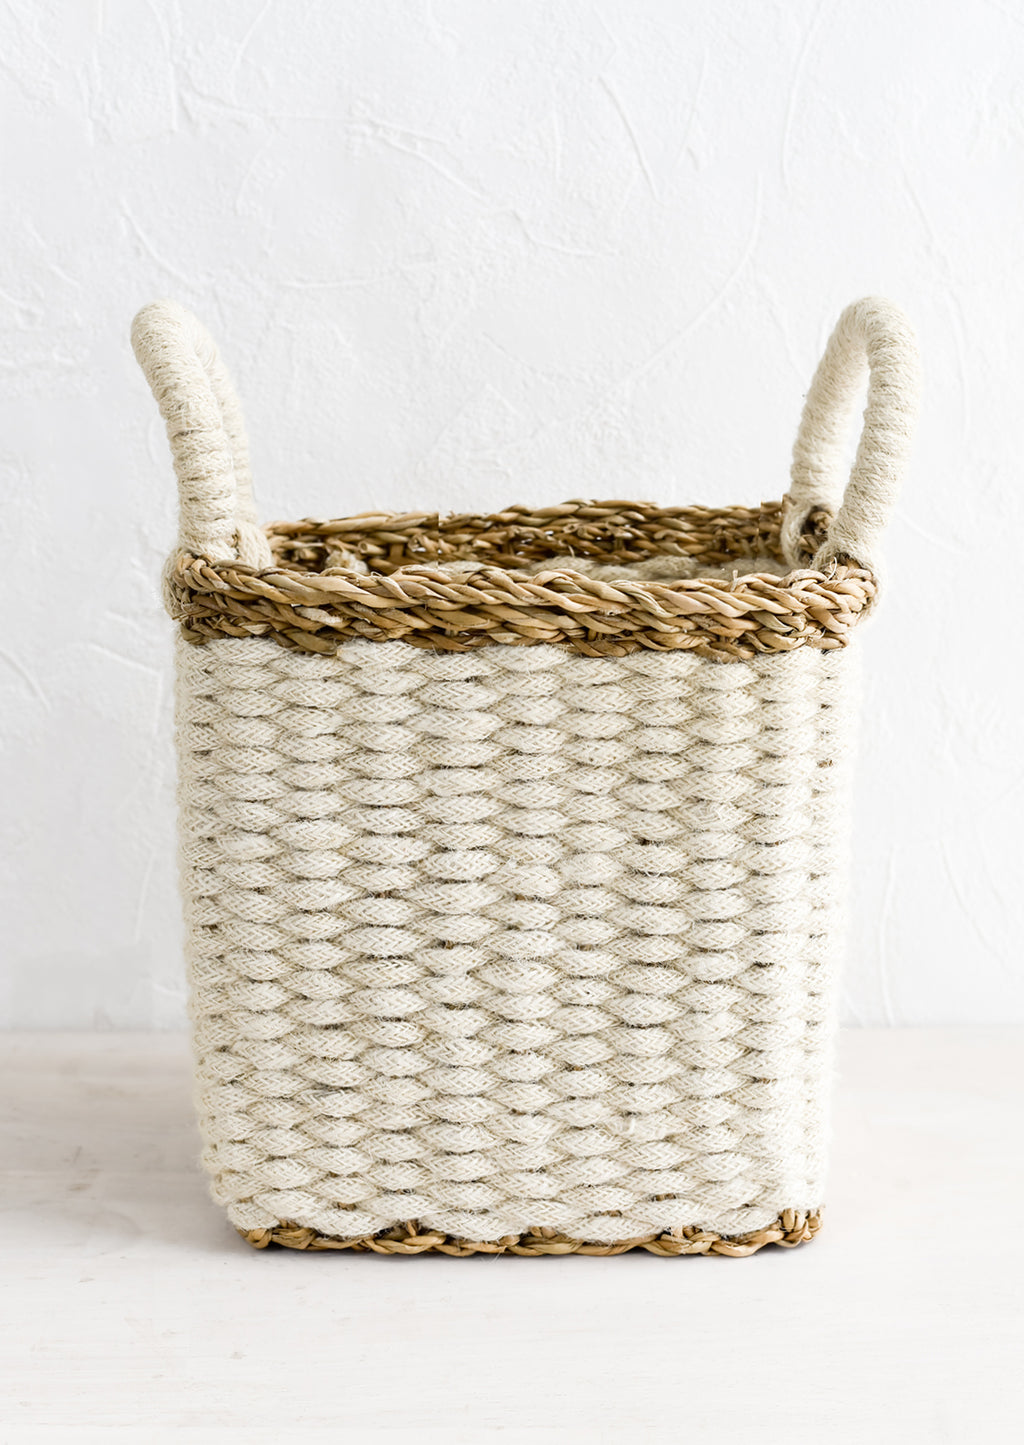 Small [$60.00]: A square storage basket in woven straw and jute, small size.